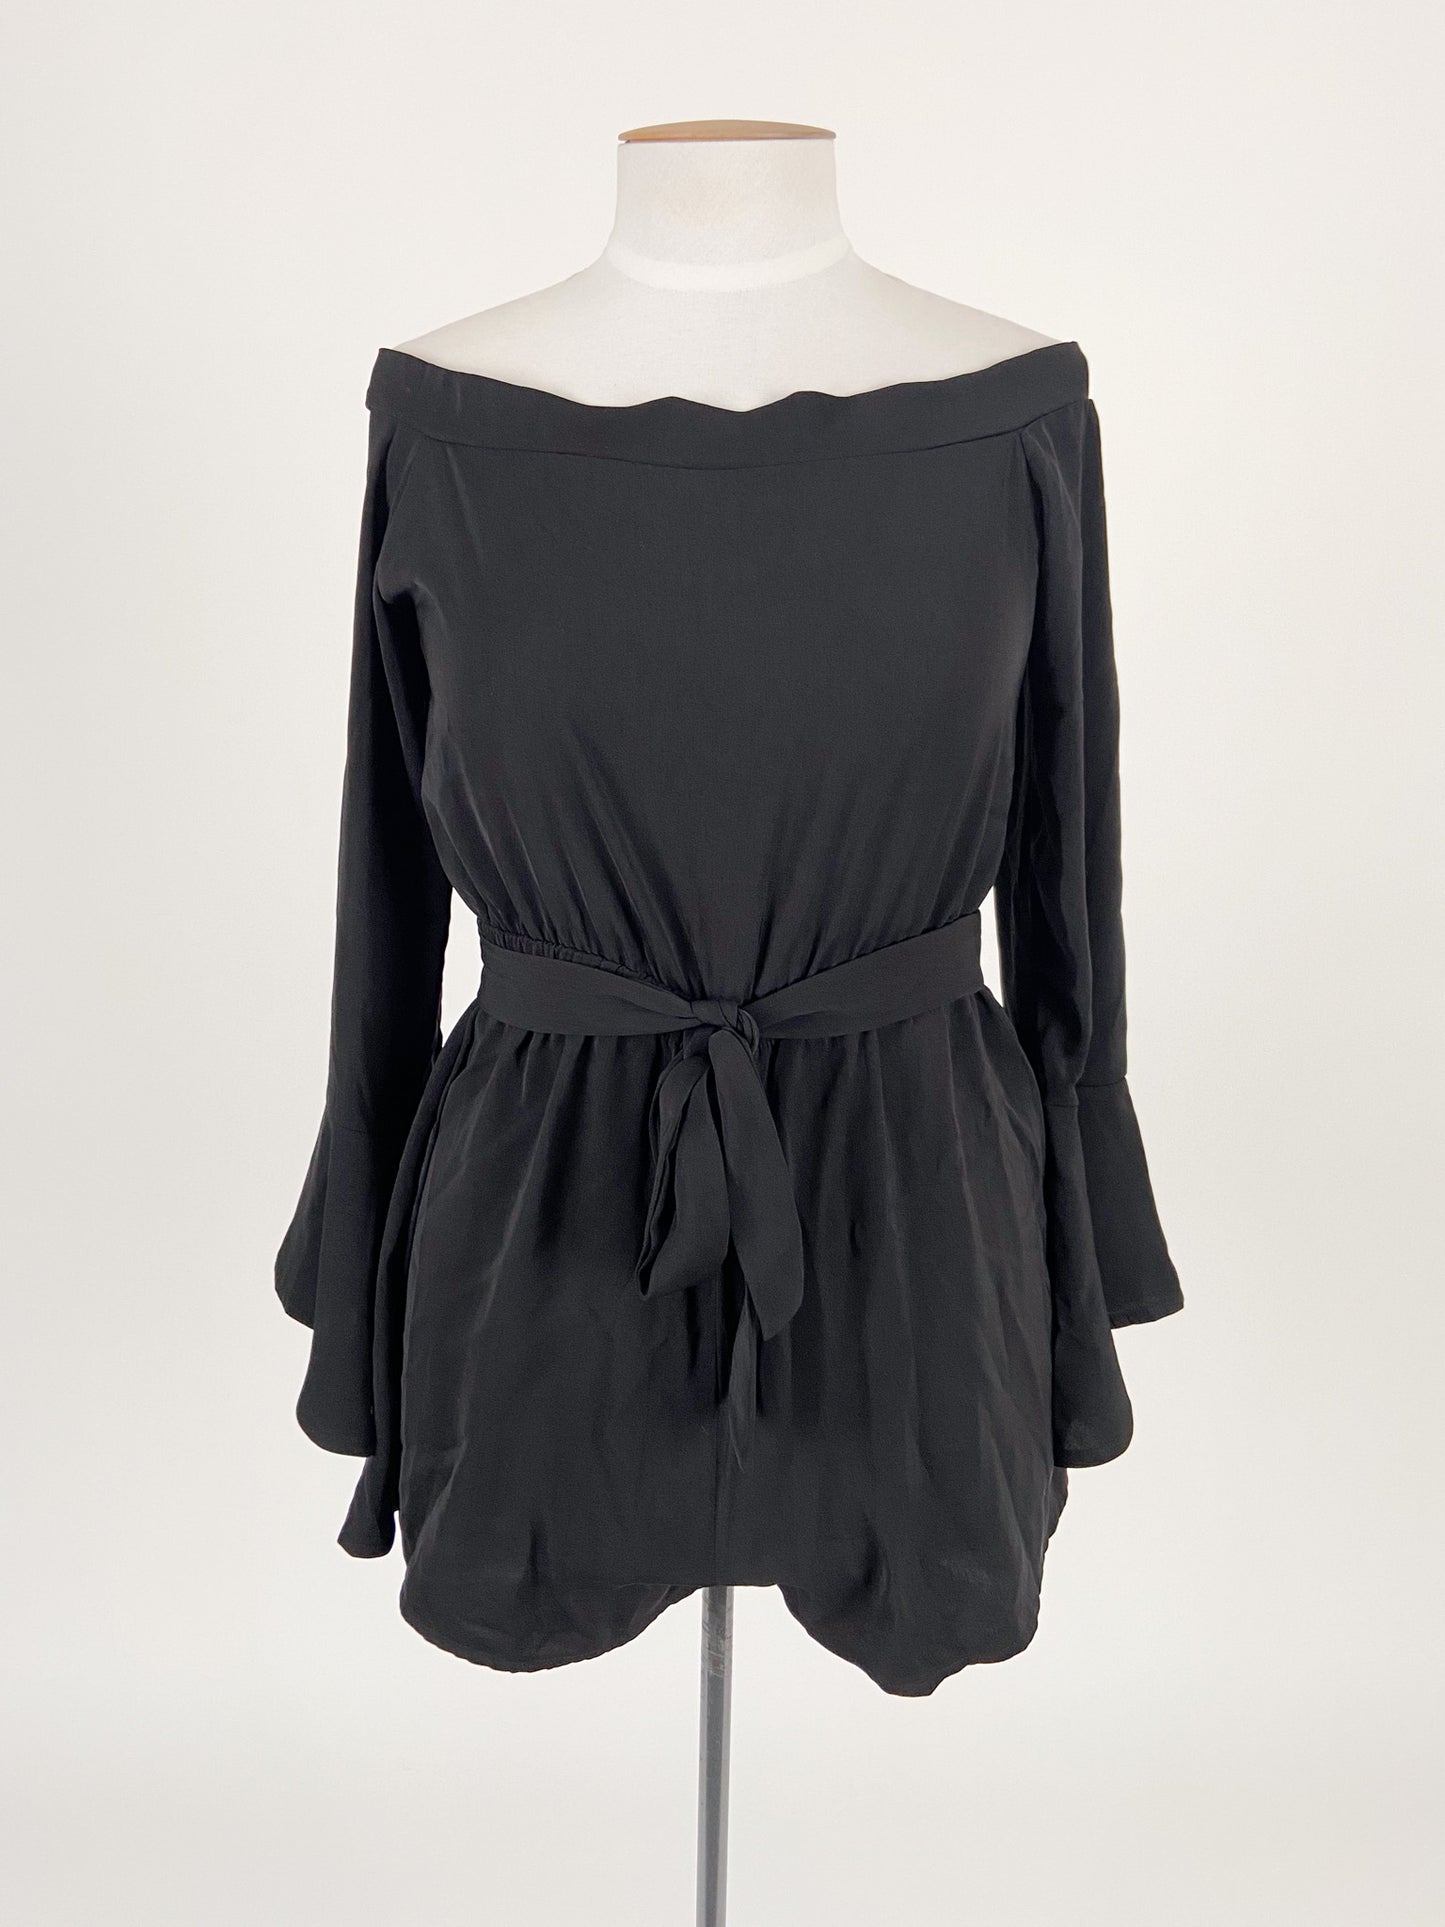 Princess Polly | Black Casual/Cocktail Playsuit | Size 10